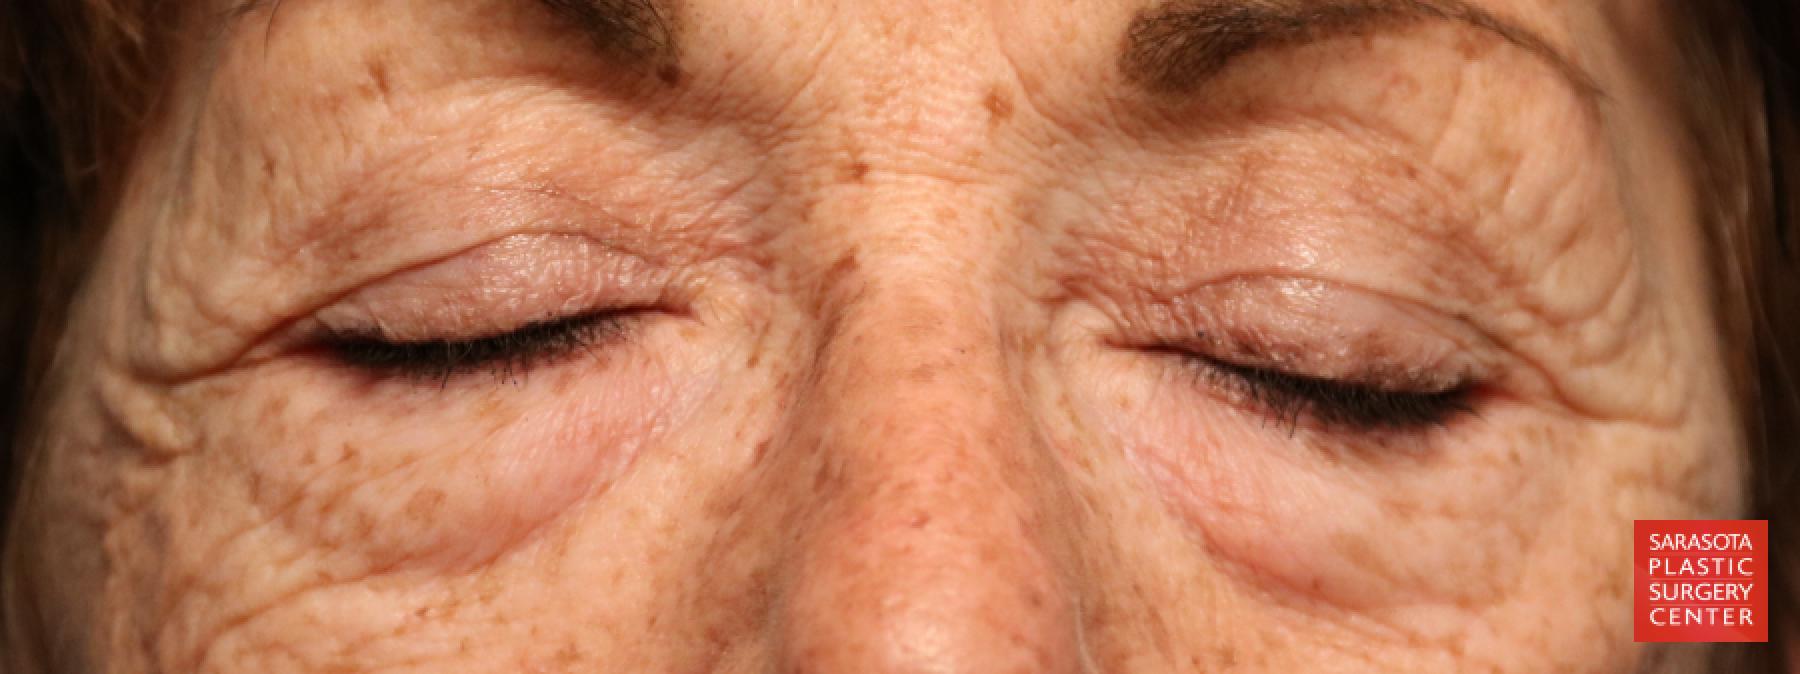 Eyelid Lift: Patient 7 - Before 3